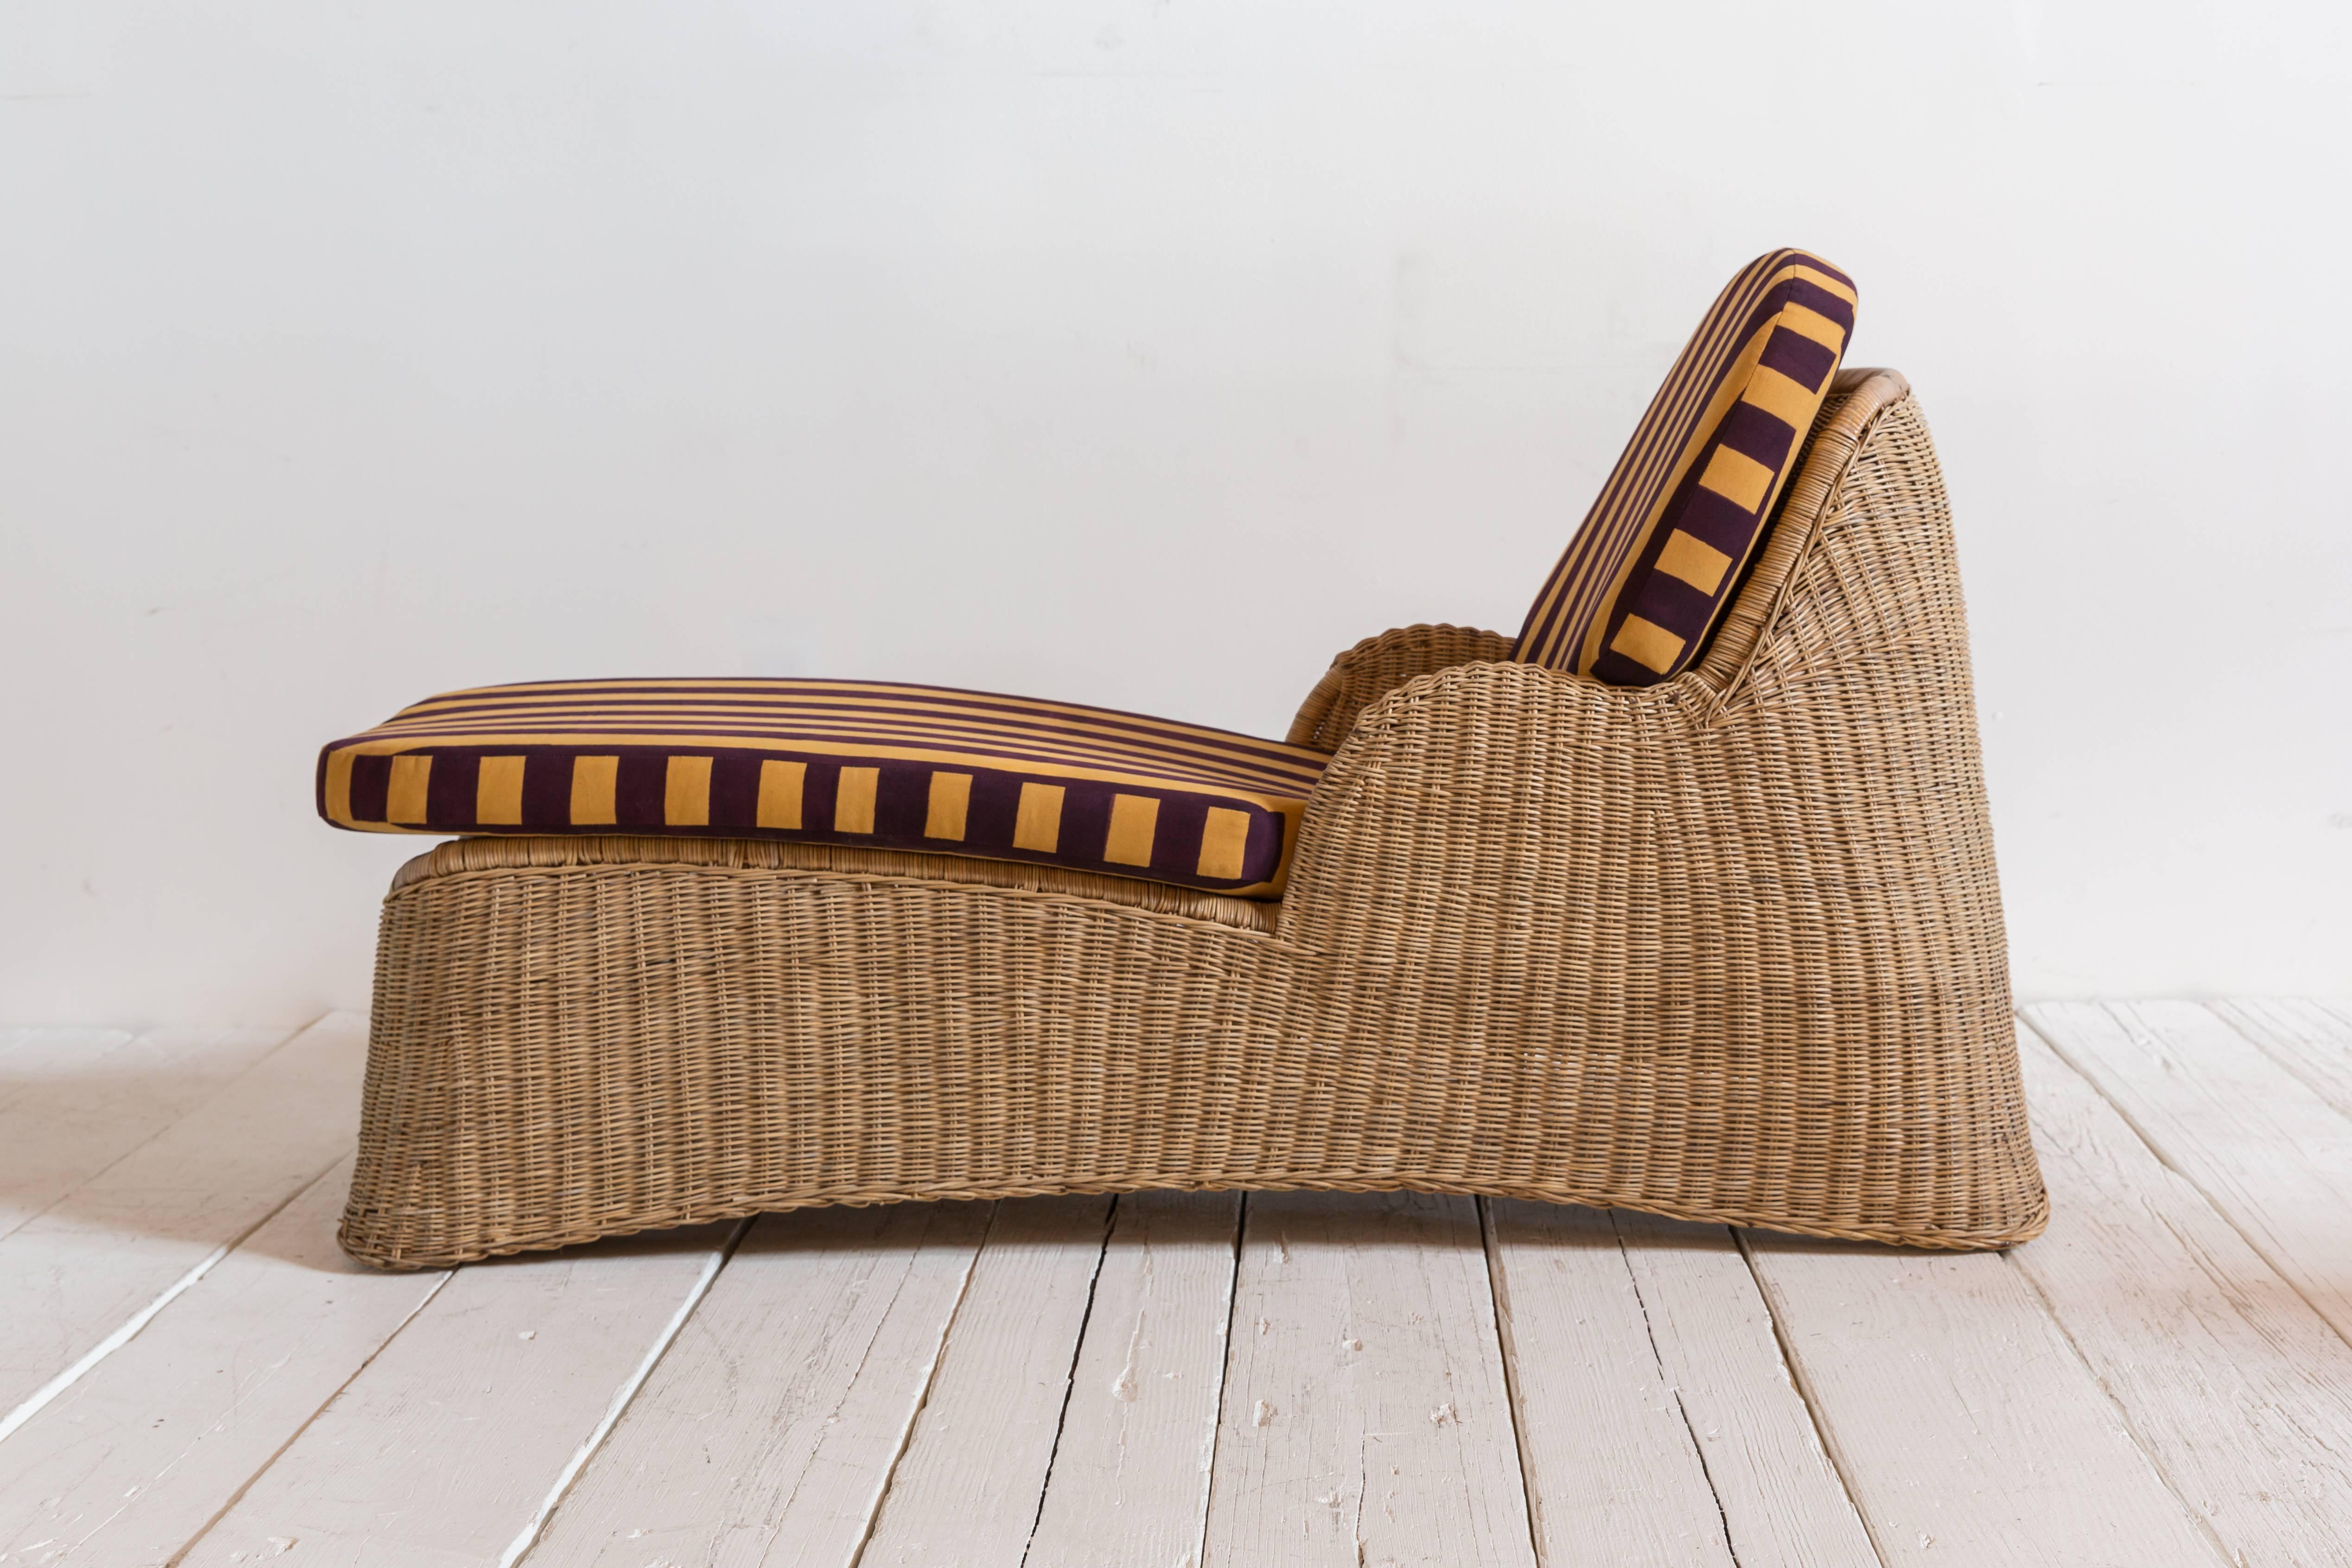 Wicker chaise newly upholstered in Lisa Corti purple and yellow striped fabric.